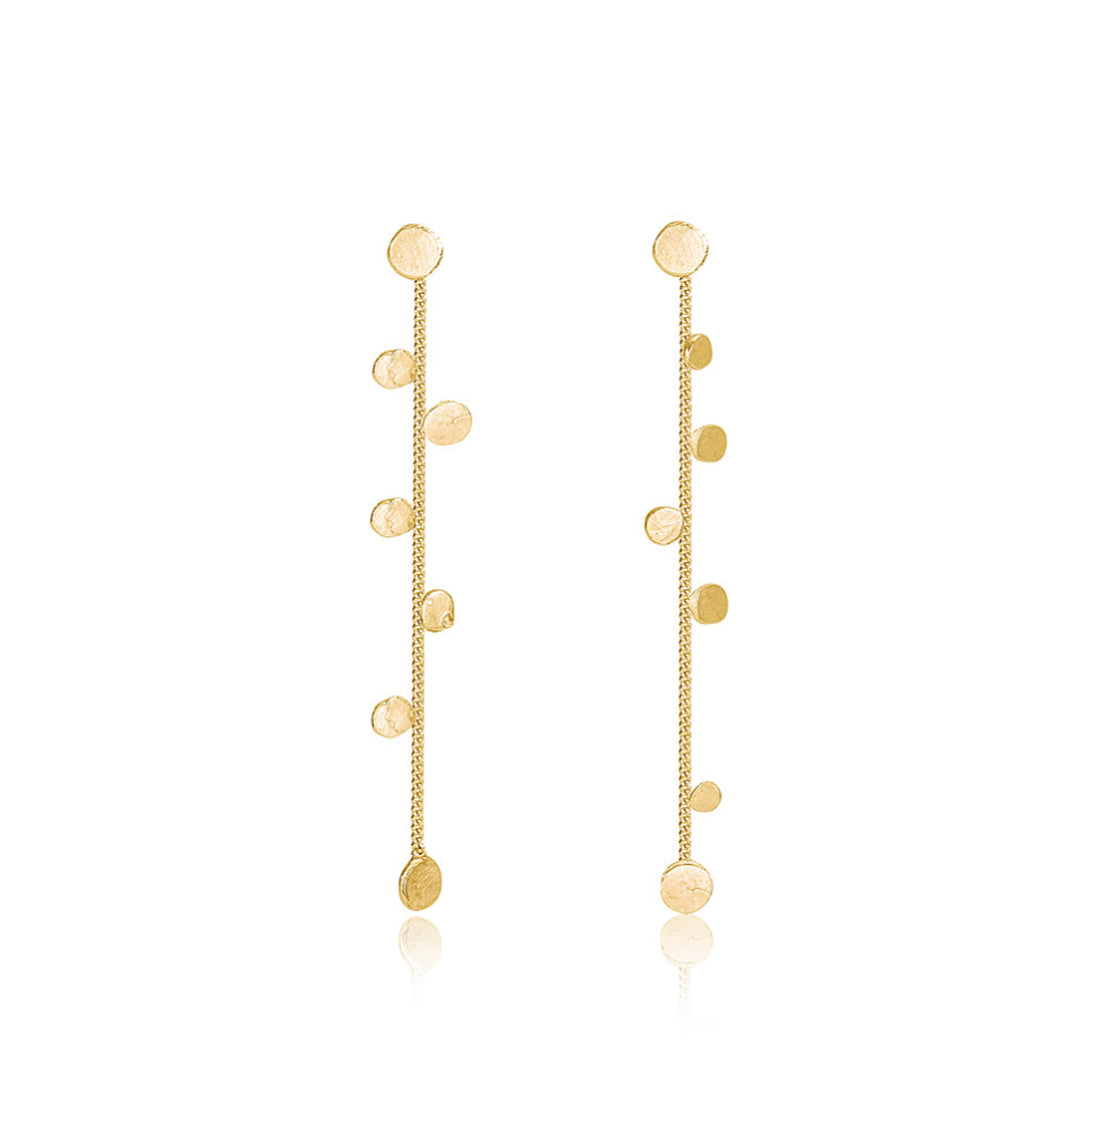 Stardust Gold Drop Earrings - IndependentBoutique.com